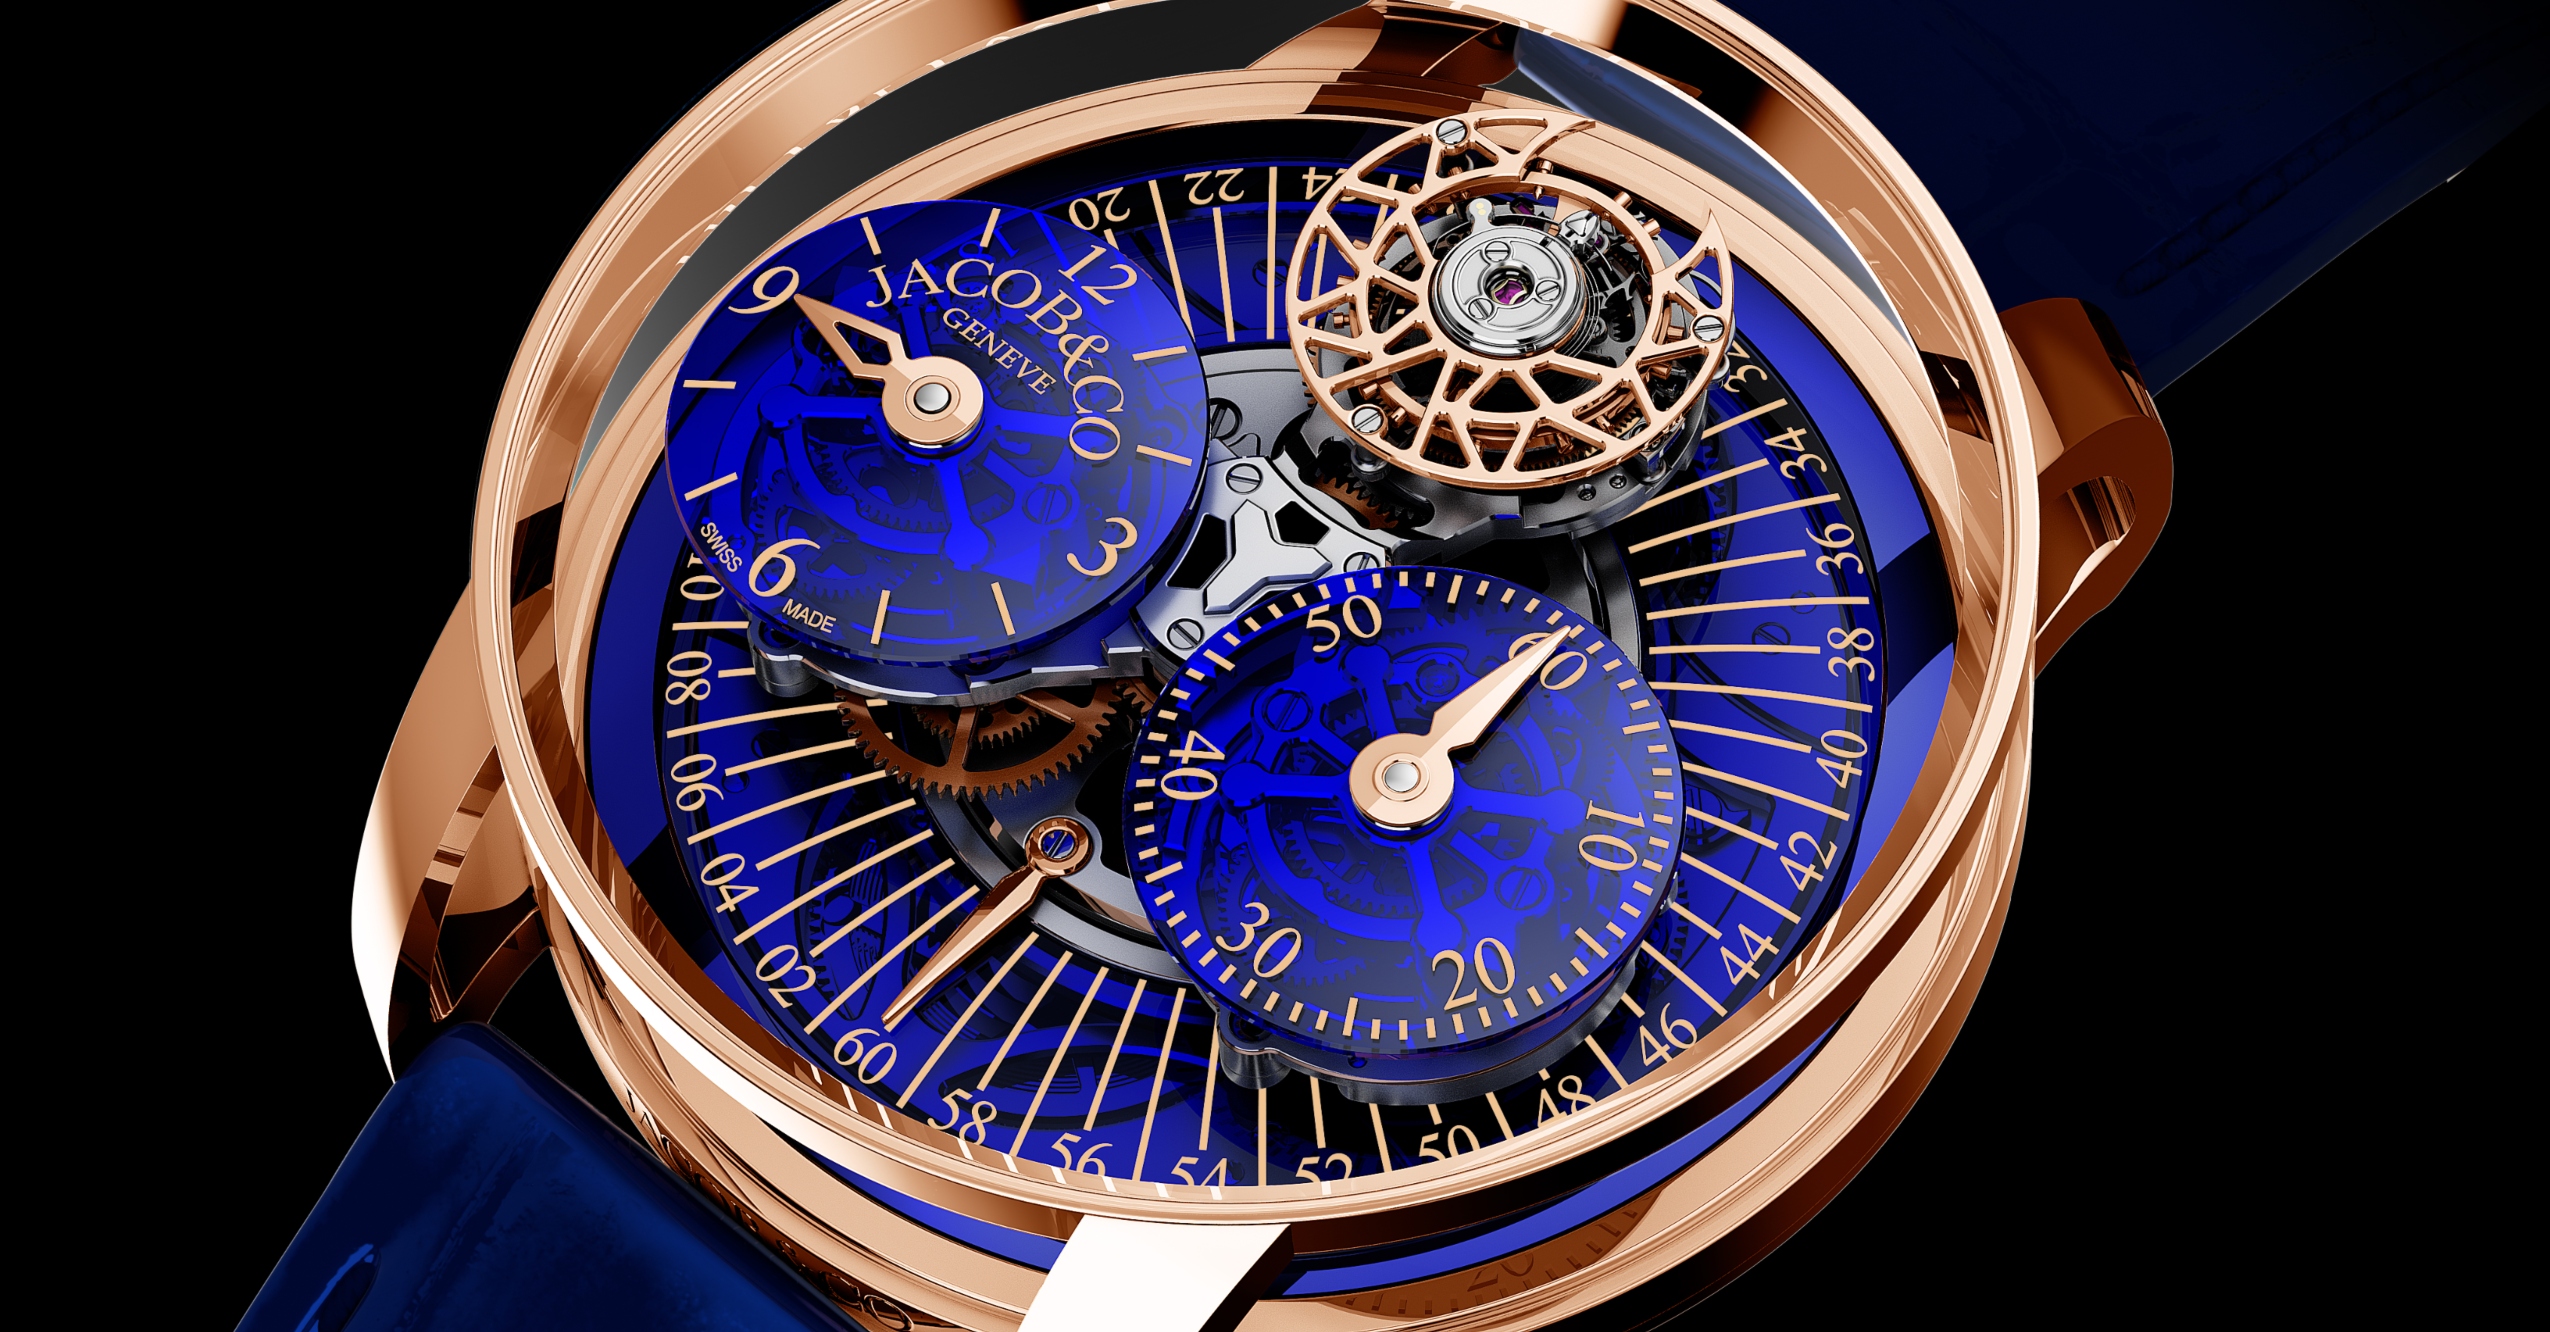 Jacob & Co.'s Latest Watch Features Sapphire Subdials That Float Like Orbiting Planets